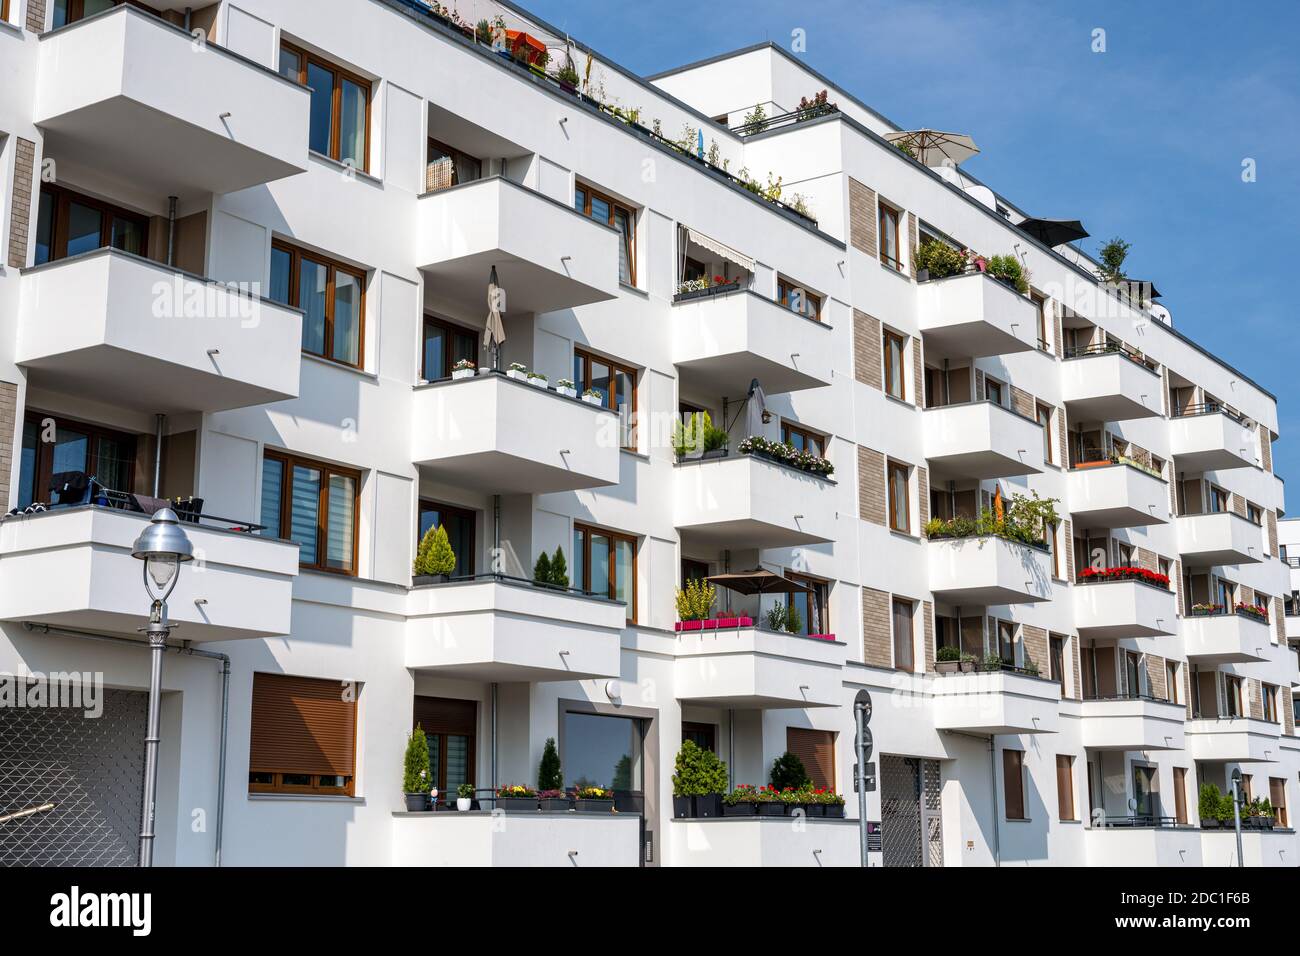 New apartment buildings with many balconies seen in Berlin Stock Photo